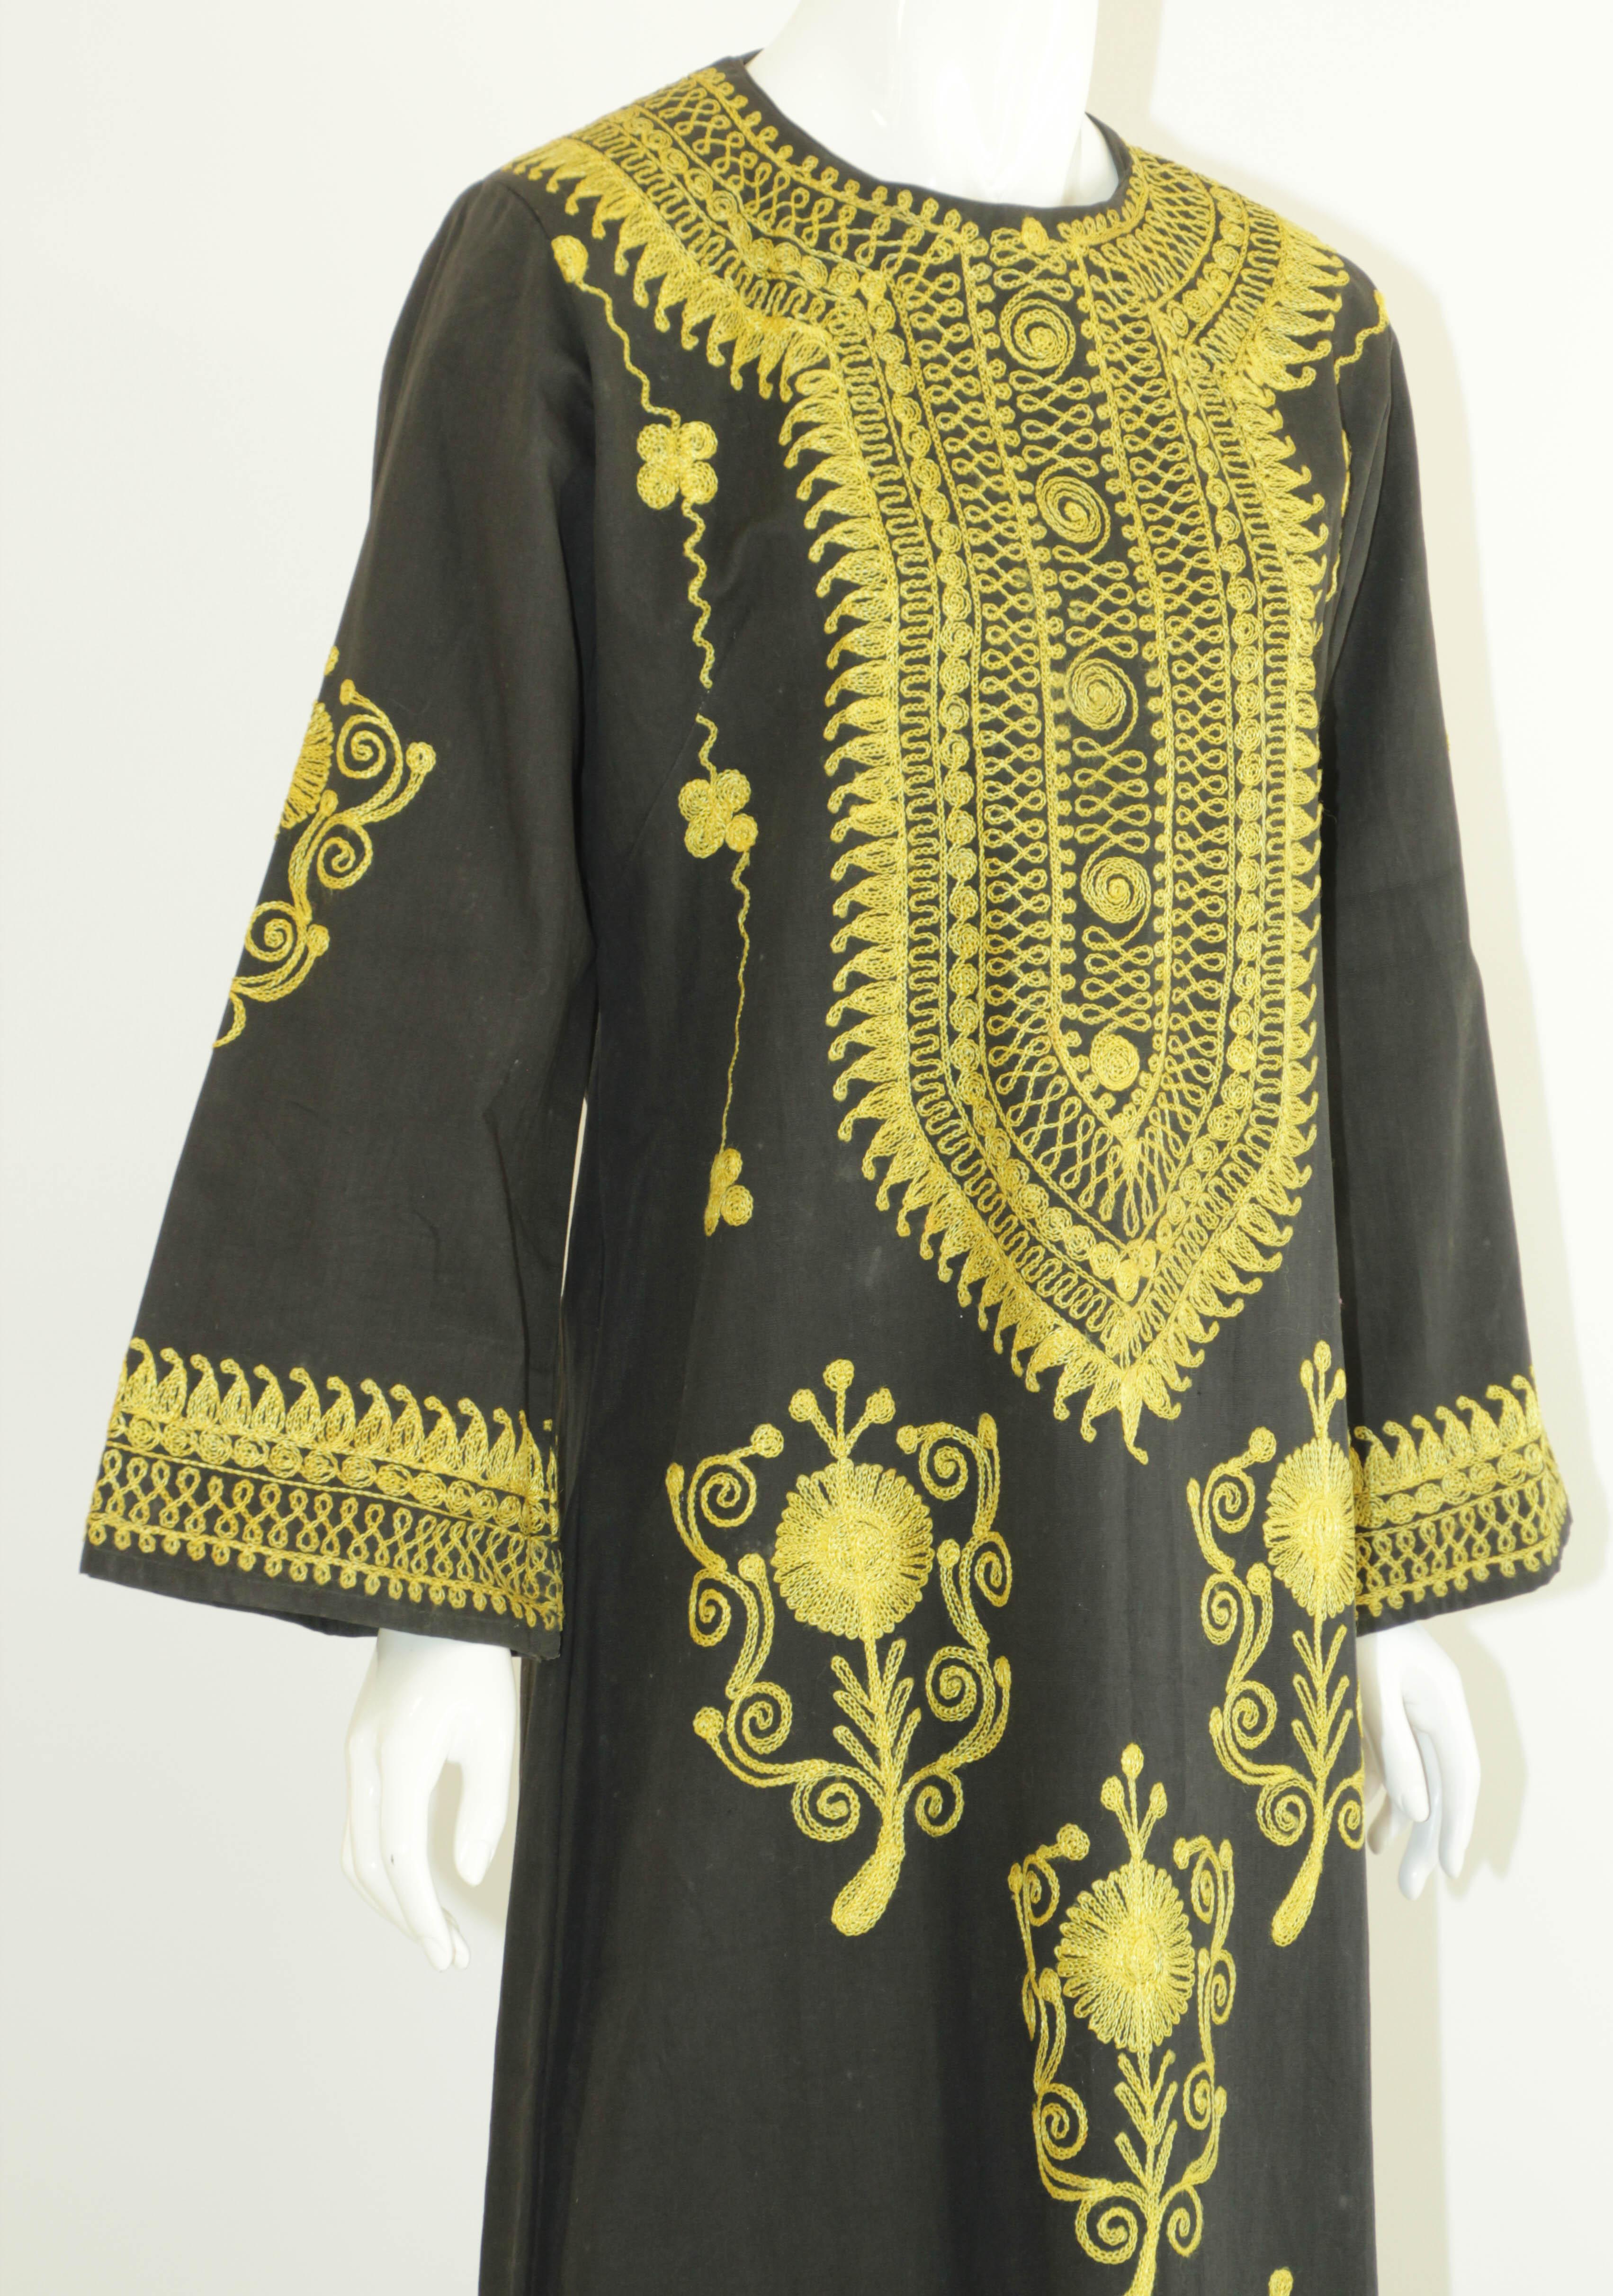 Black and Gold Caftan, 1970 Dress Vintage Ethnic Kuchi Kaftan In Good Condition For Sale In North Hollywood, CA